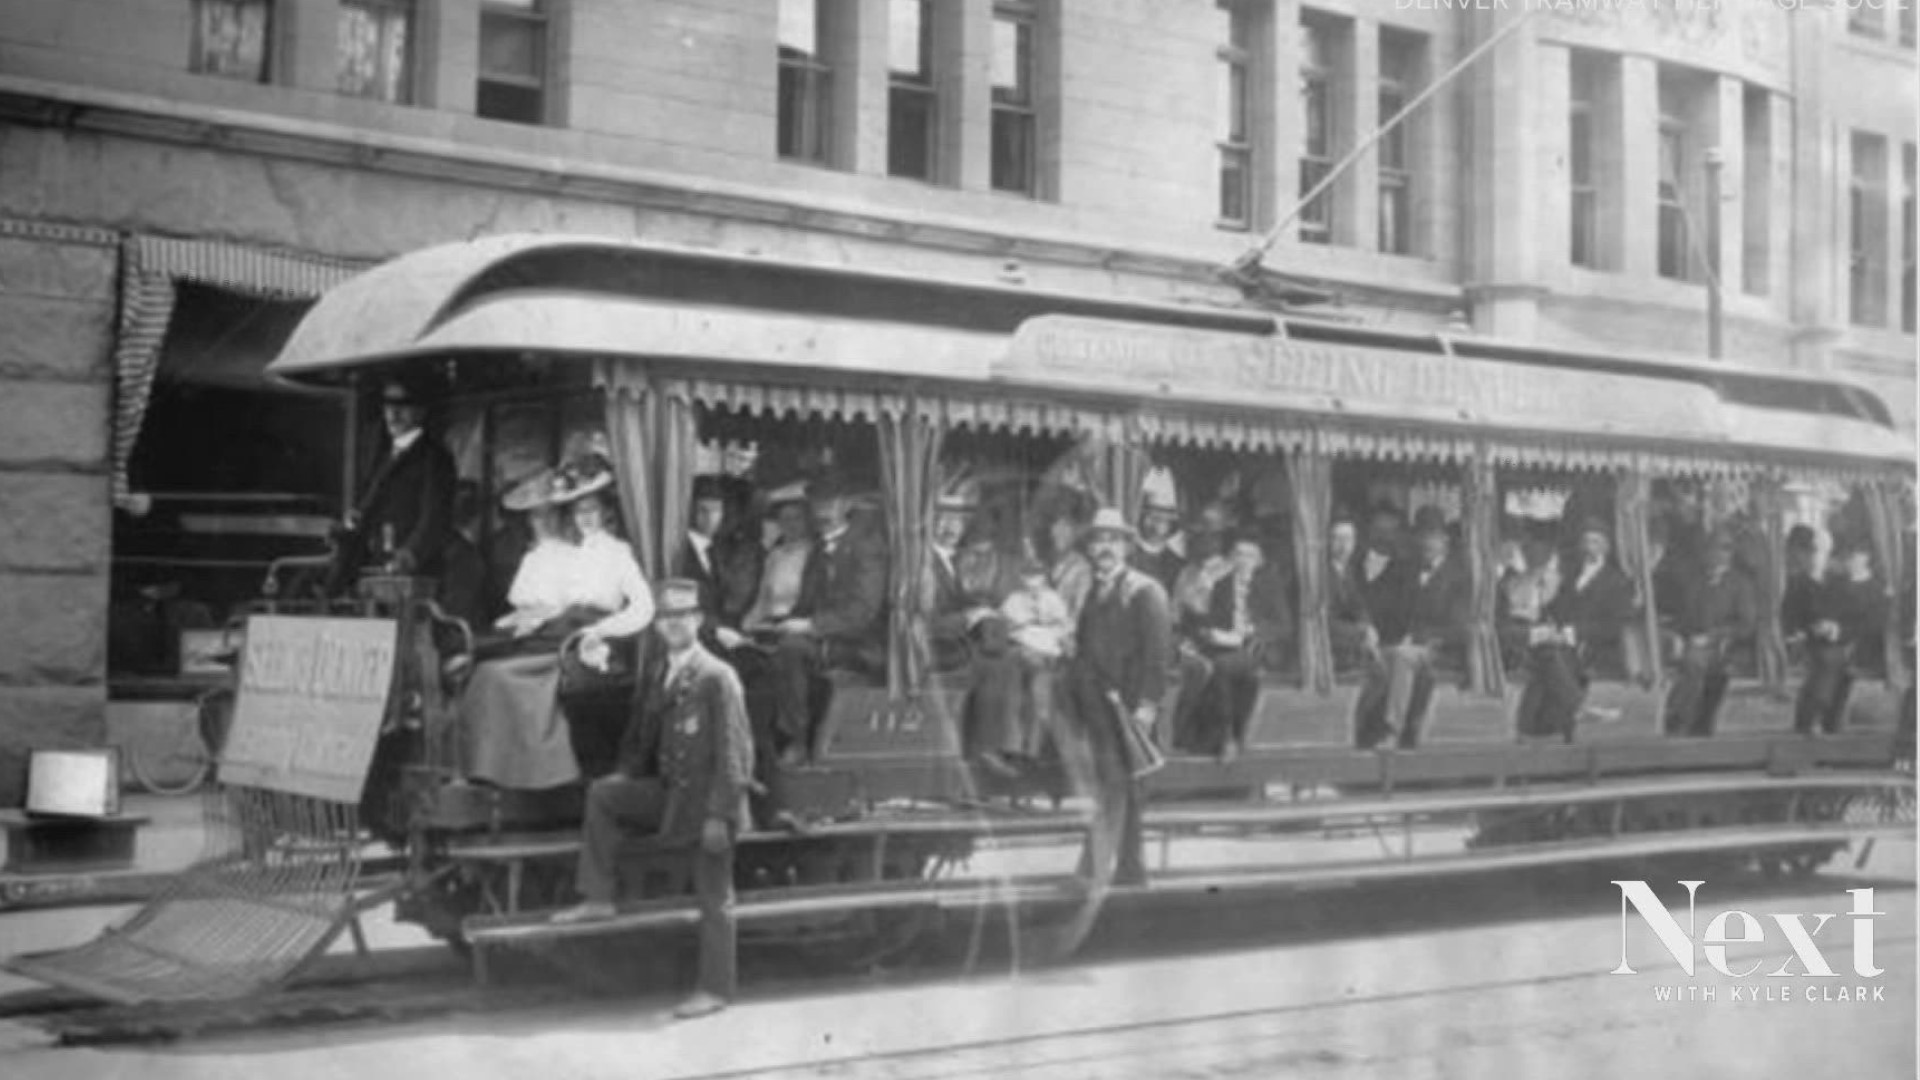 Denver's historic electric rail transit system is opening for the summer. The city once had an extensive electric rail system made of more than 250 miles of tracks.